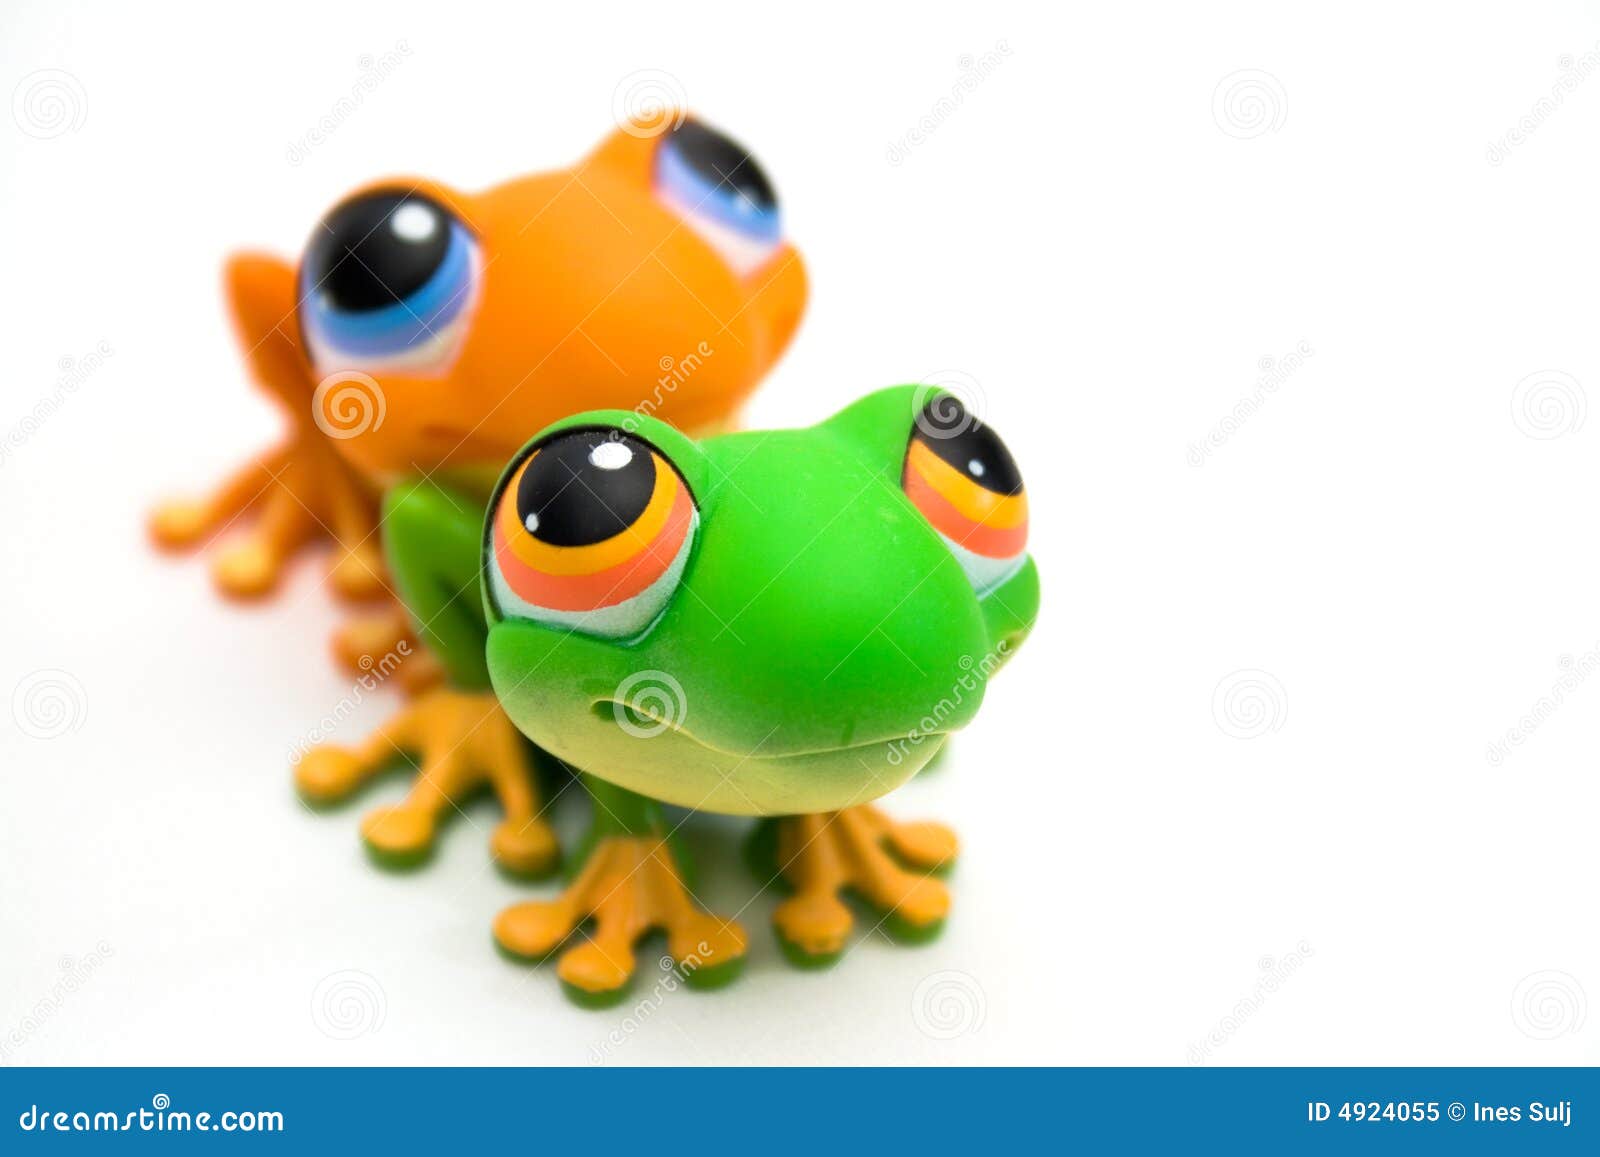 Frog toys stock image. Image of looking, reptiles, frog - 4924055